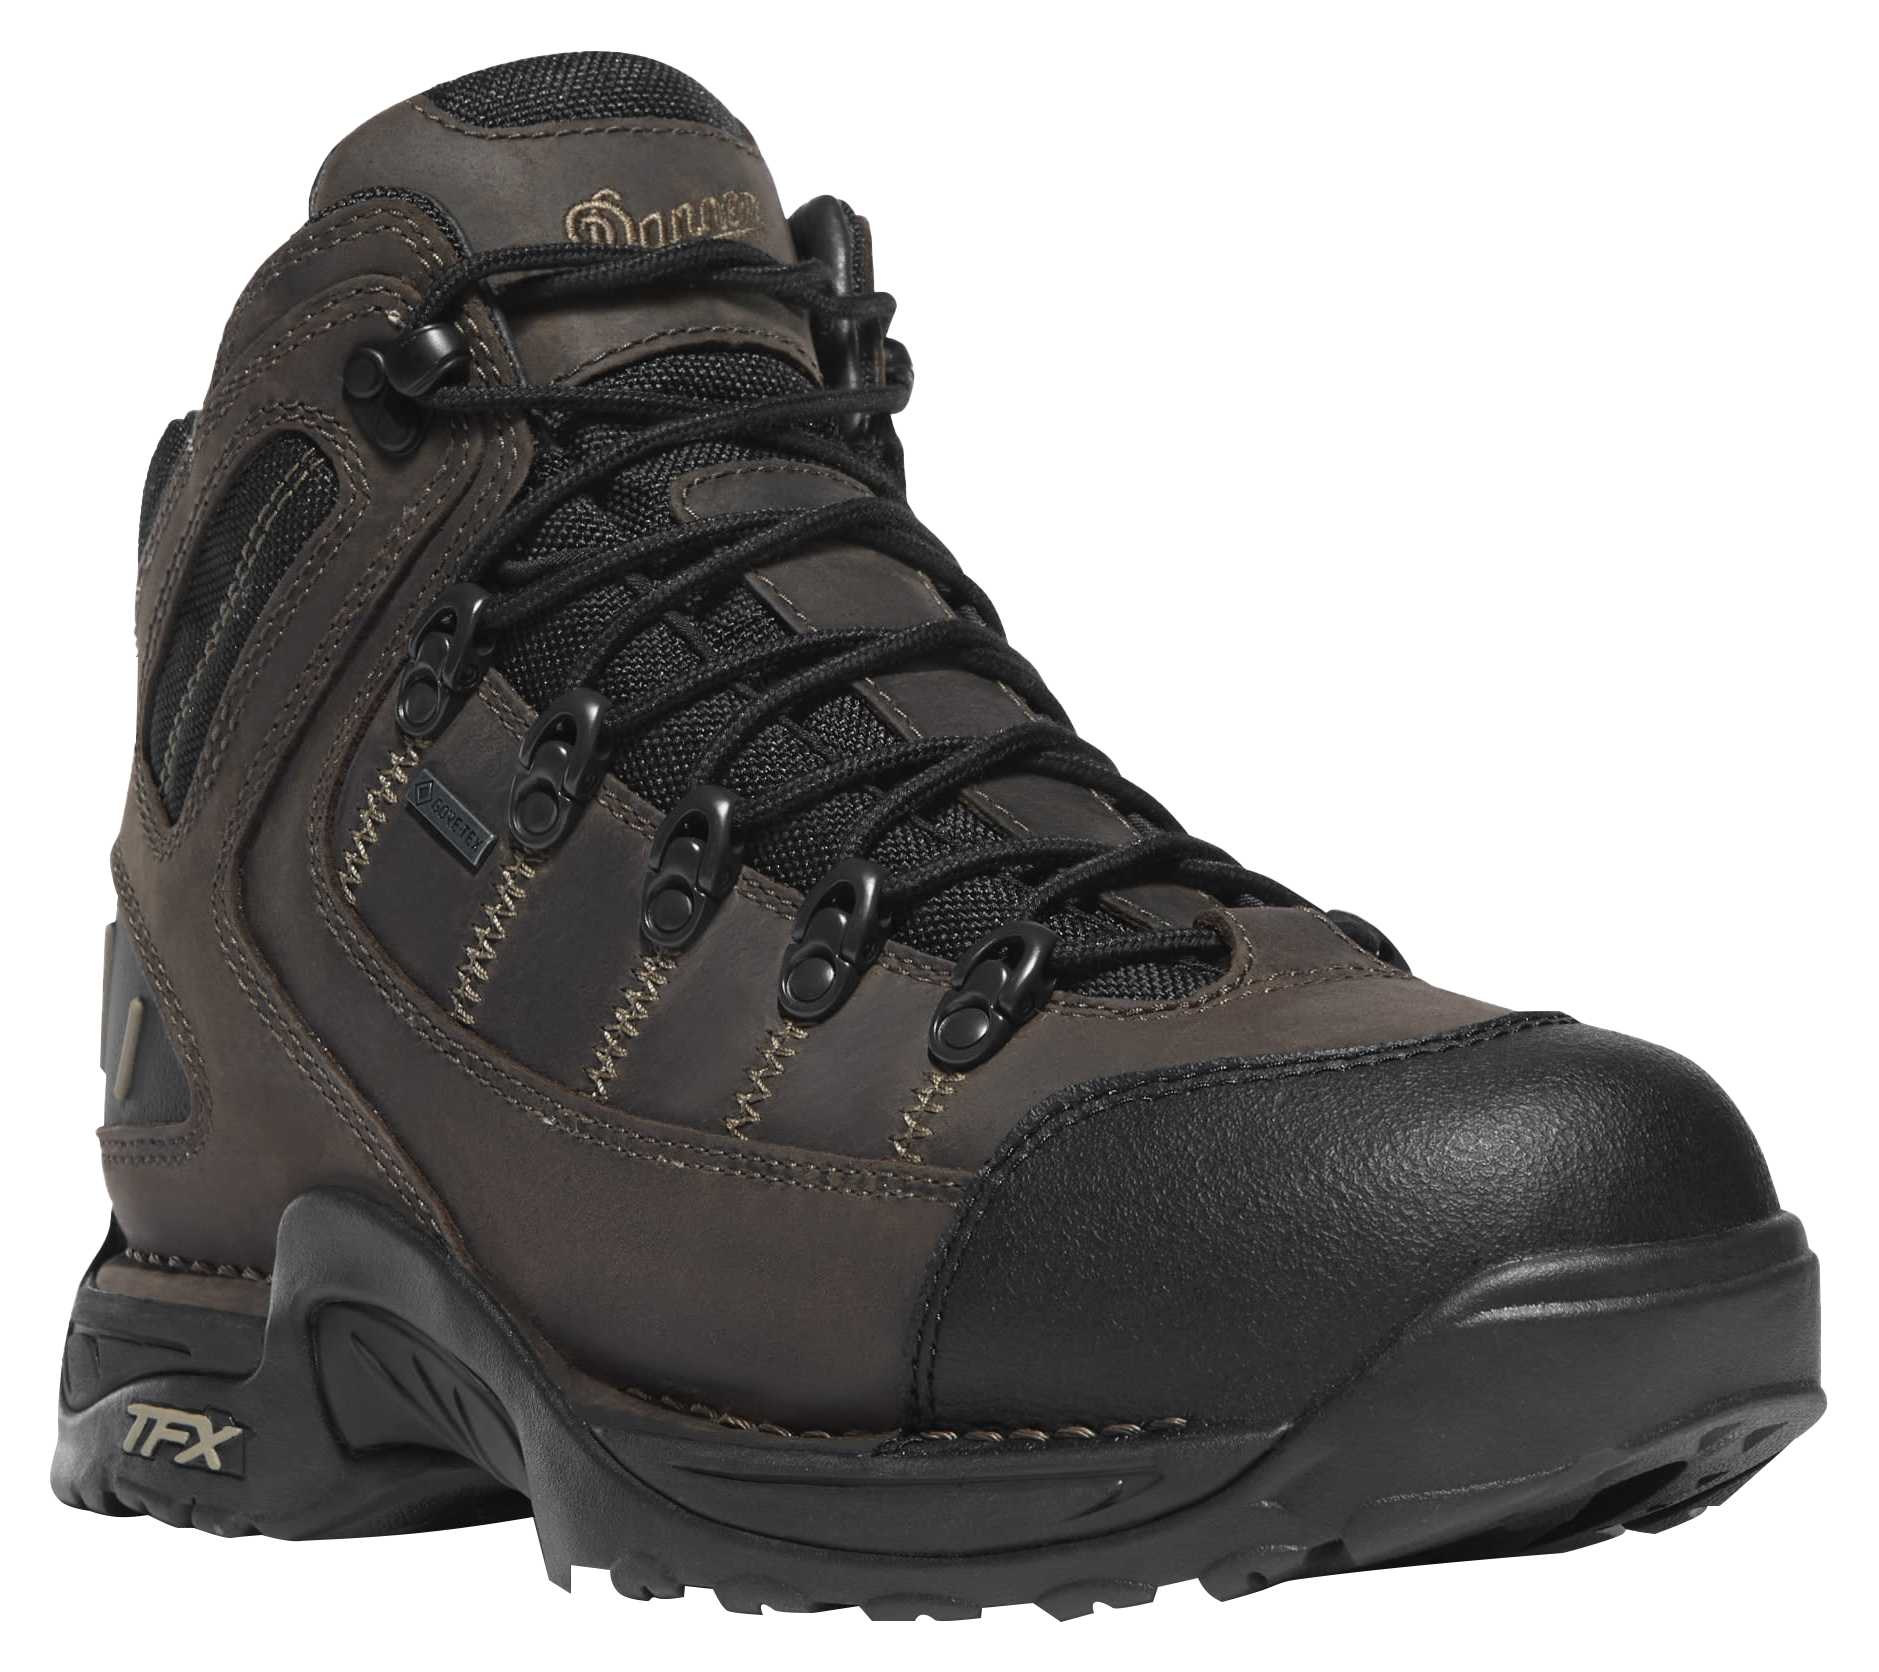 Danner 453 GORE-TEX Waterproof Hiking Boots for Men - Loam Brown/Chocolate Chip - 11M